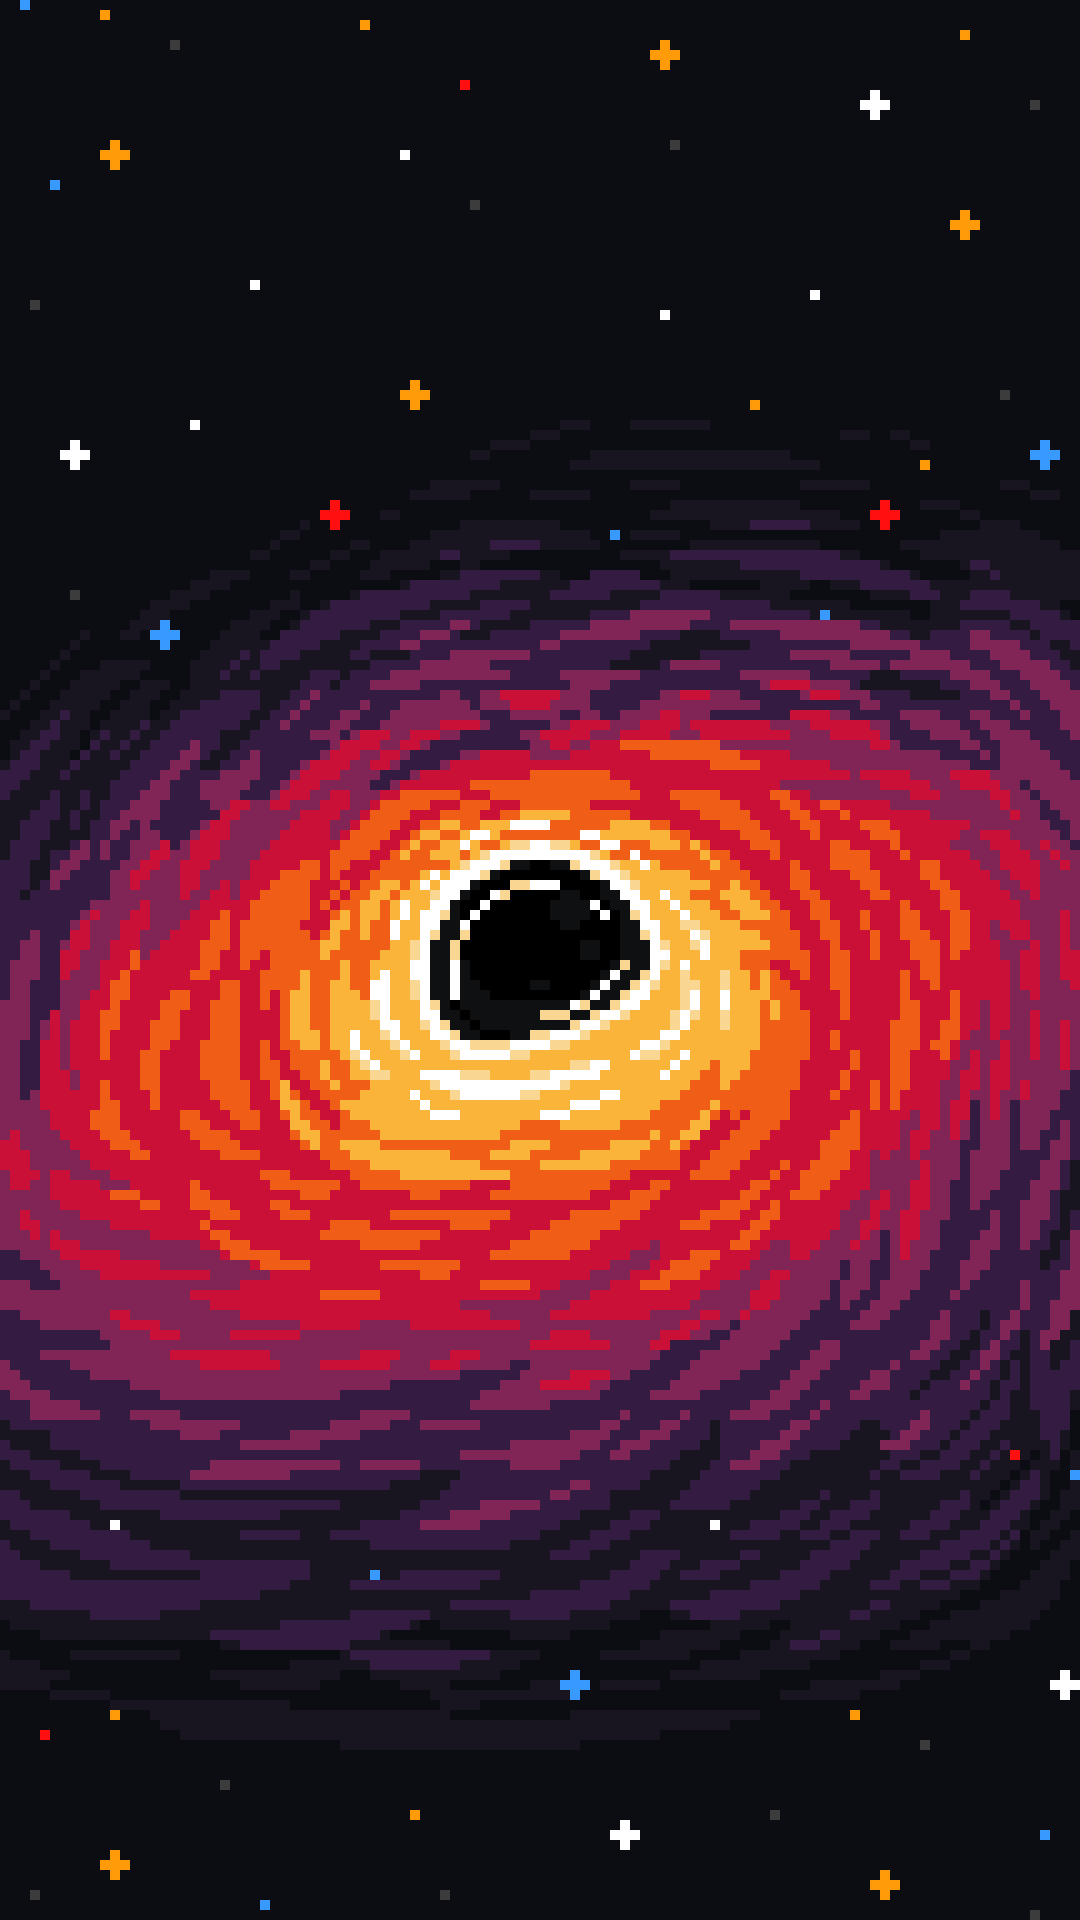 ⭐️Free⭐️ Mobile Wallpaper The Black Hole's Ko Fi Shop Fi ❤️ Where Creators Get Support From Fans Through Donations, Memberships, Shop Sales And More! The Original 'Buy Me A Coffee'